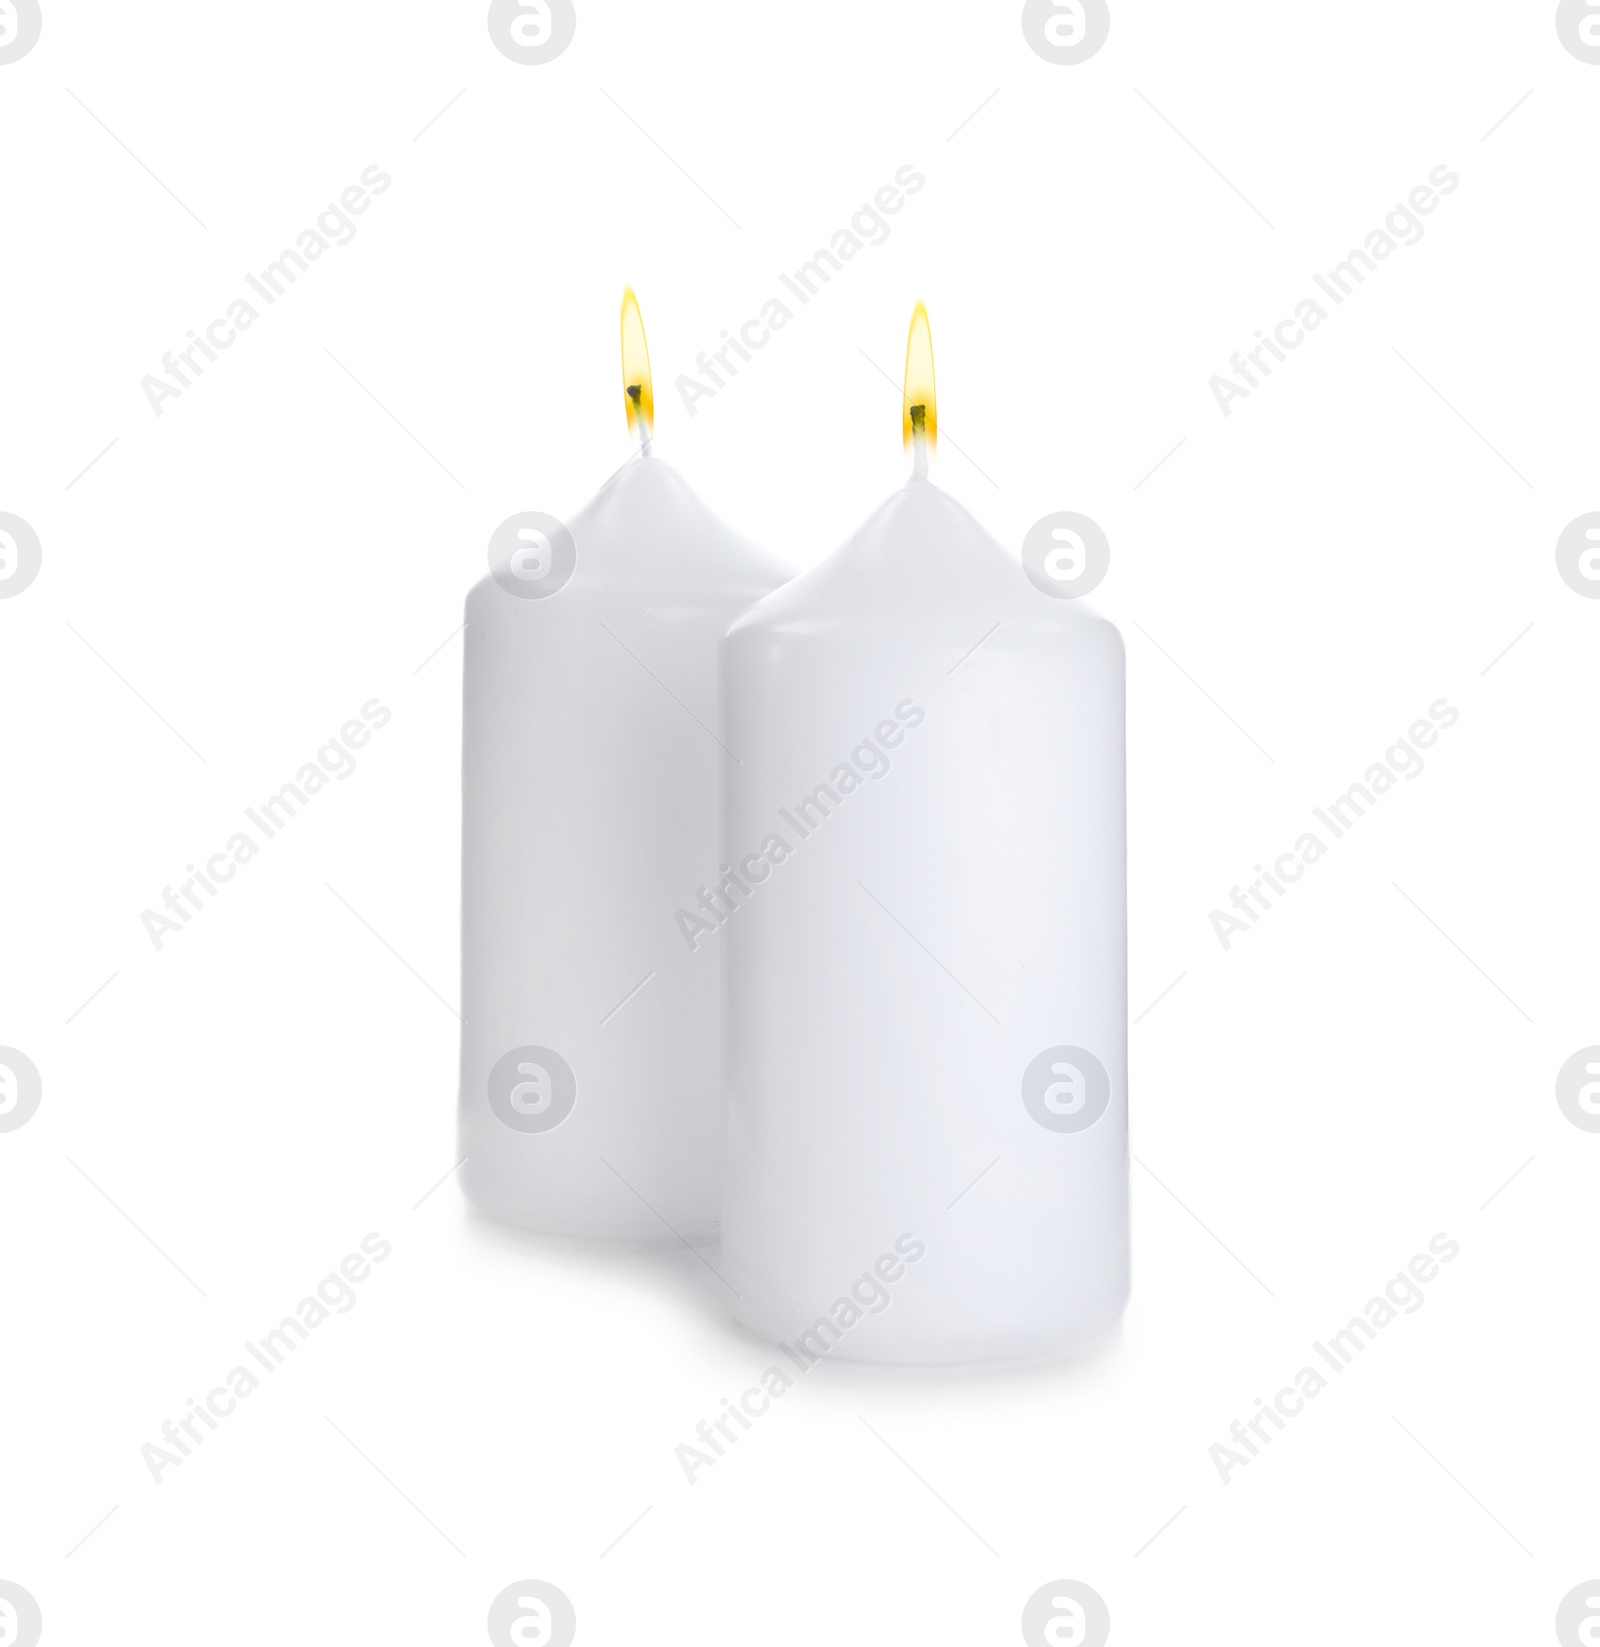 Photo of Wax candles with wicks isolated on white